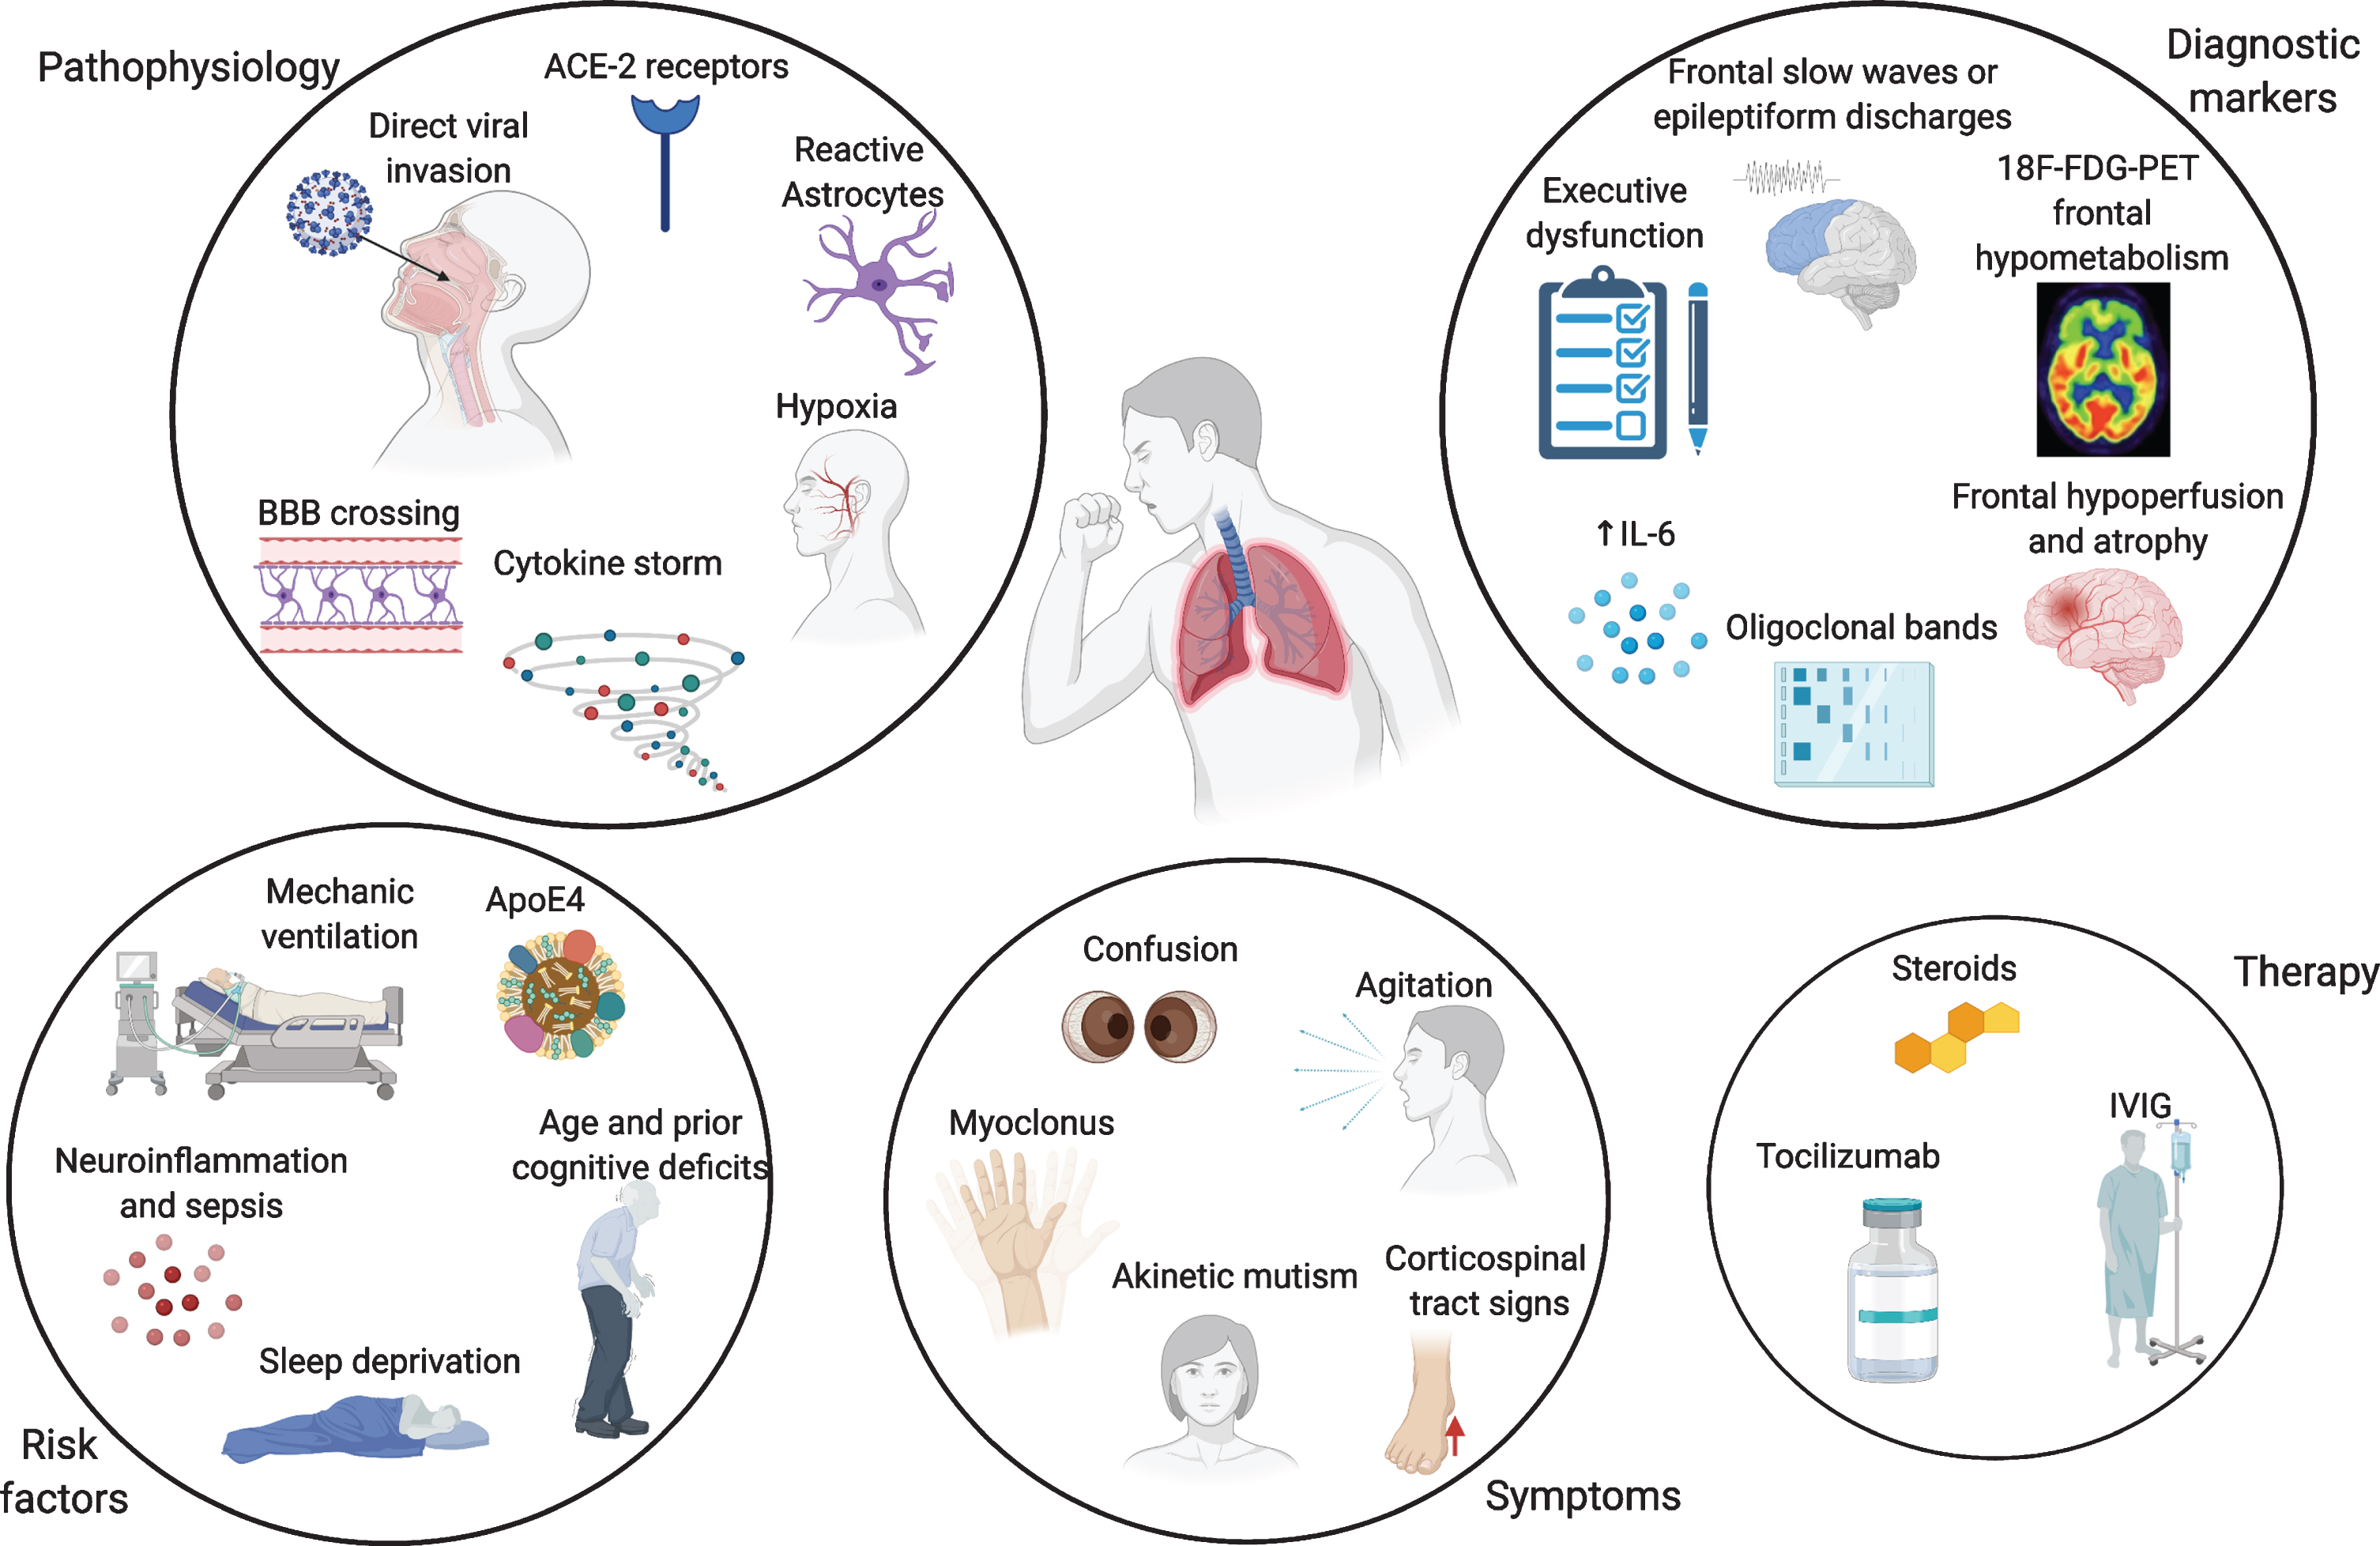 Overview of the pathophysiological mechanisms, risk factors, symptoms, and biomarkers of cognitive impairment and therapy in COVID-19 patients. Made in ©BioRender - biorender.com.